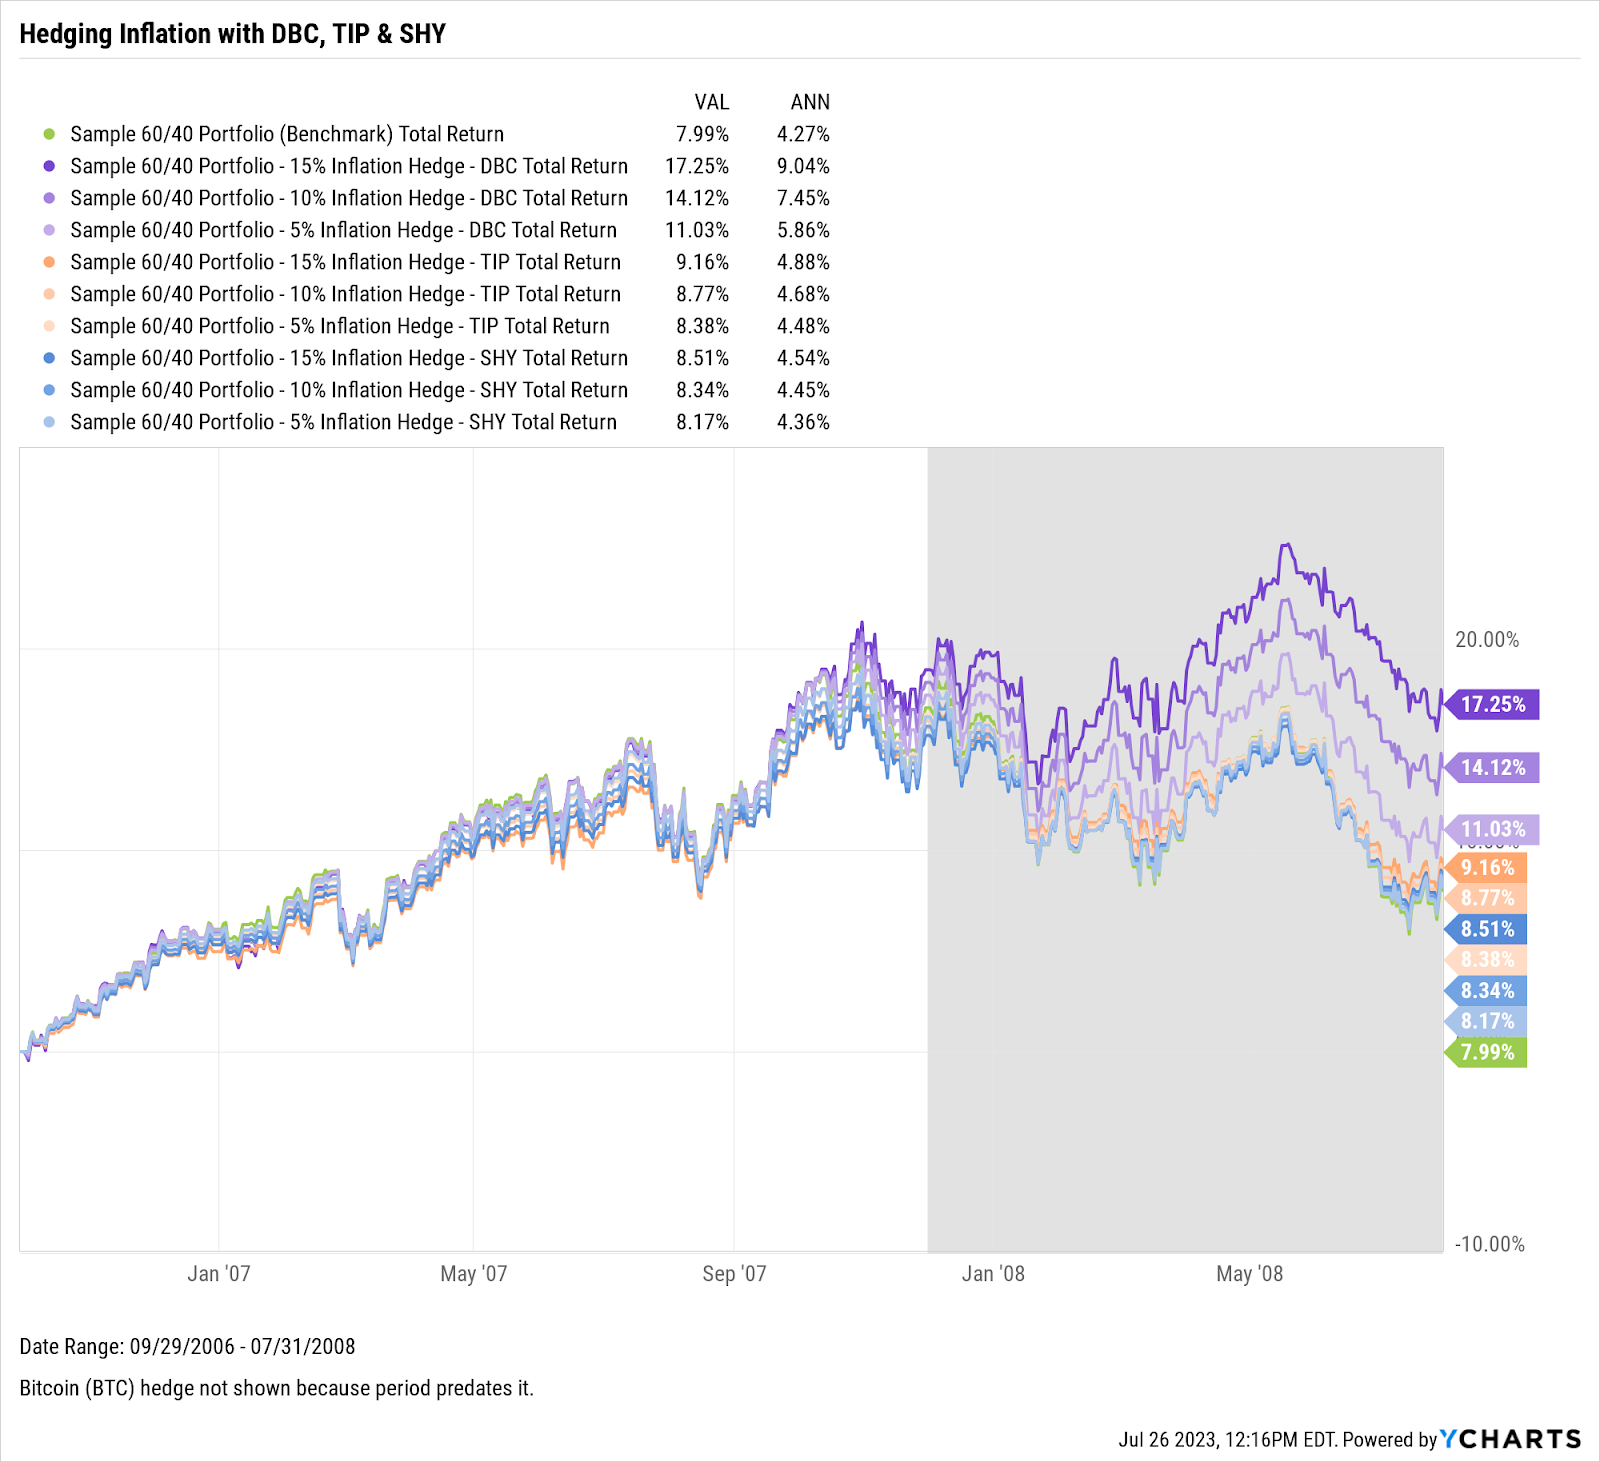 A chart showing how effective portfolios using DBC, TIP or SHY as a hedge against inflation were from 9/29/2006 - 7/31/2008